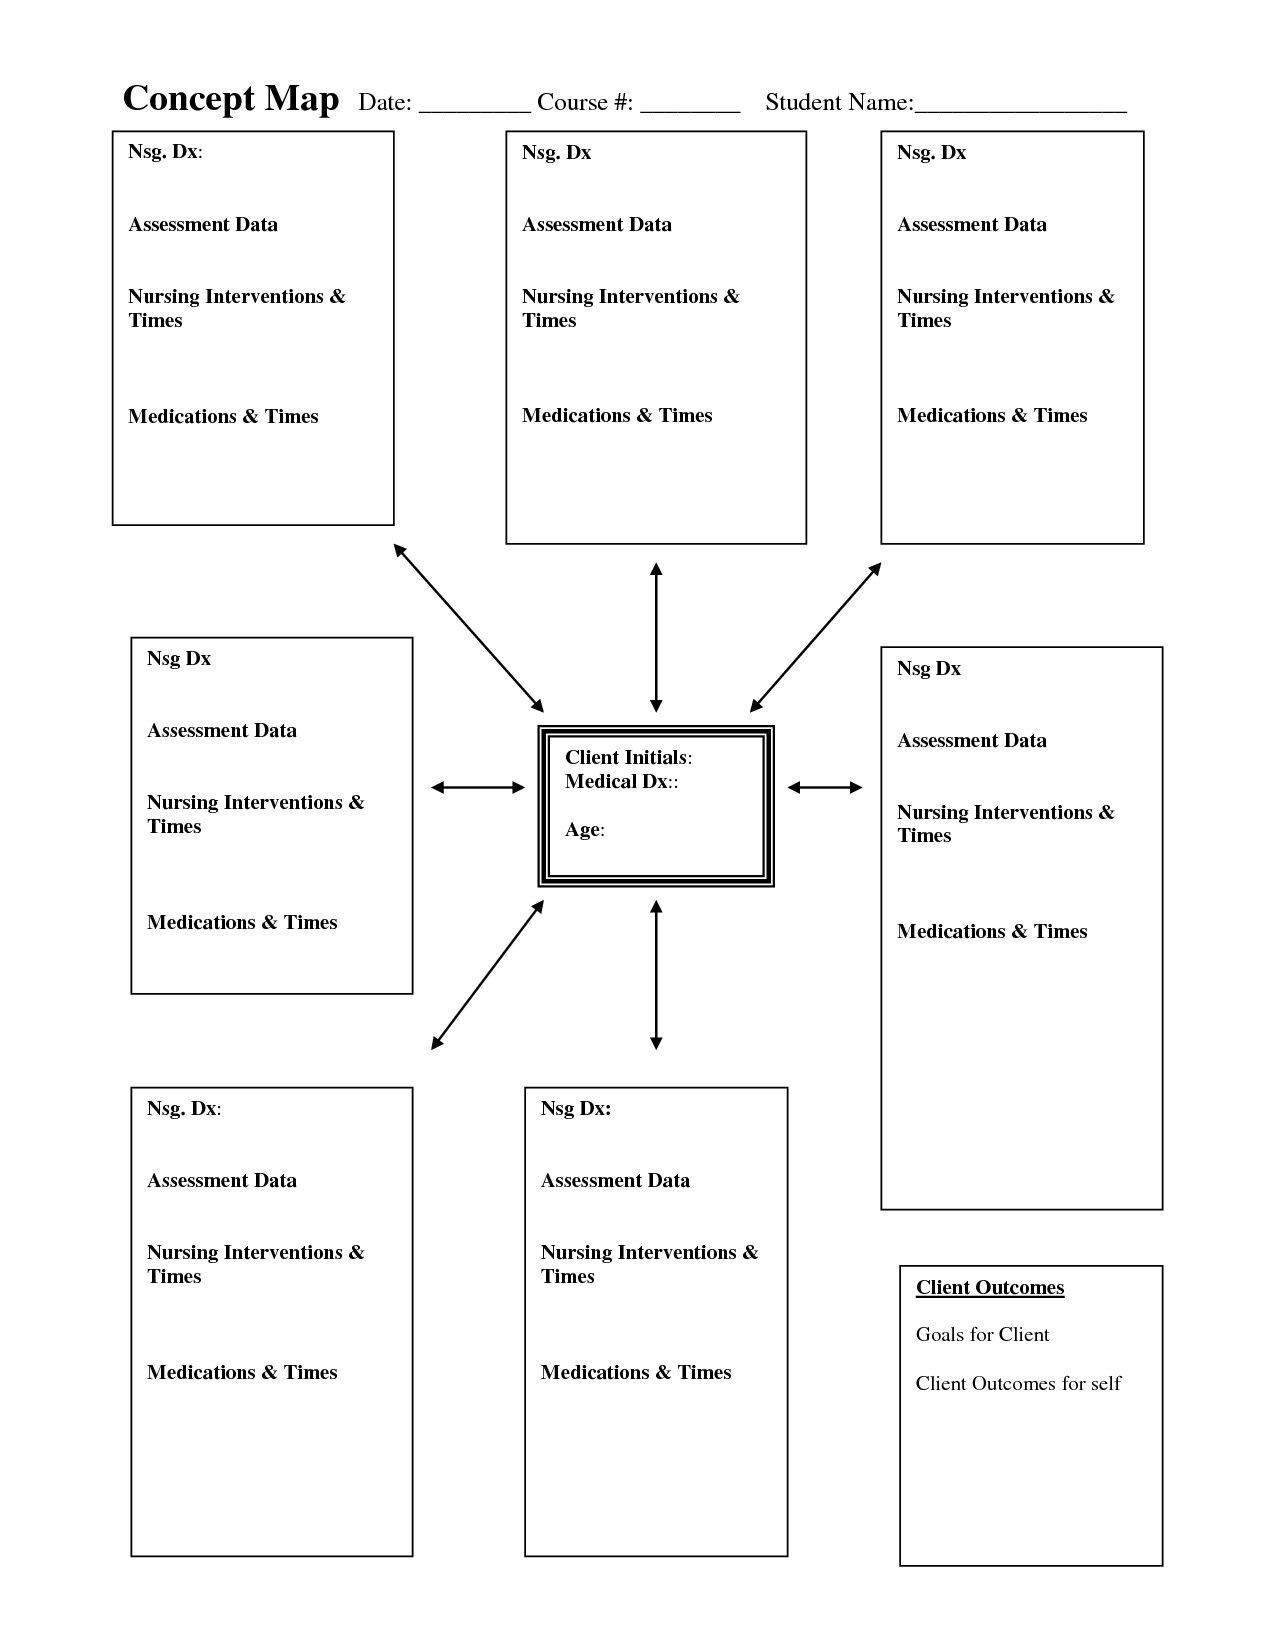 Skills Worksheet Concept Mapping Linkage Mapping Worksheet Answers